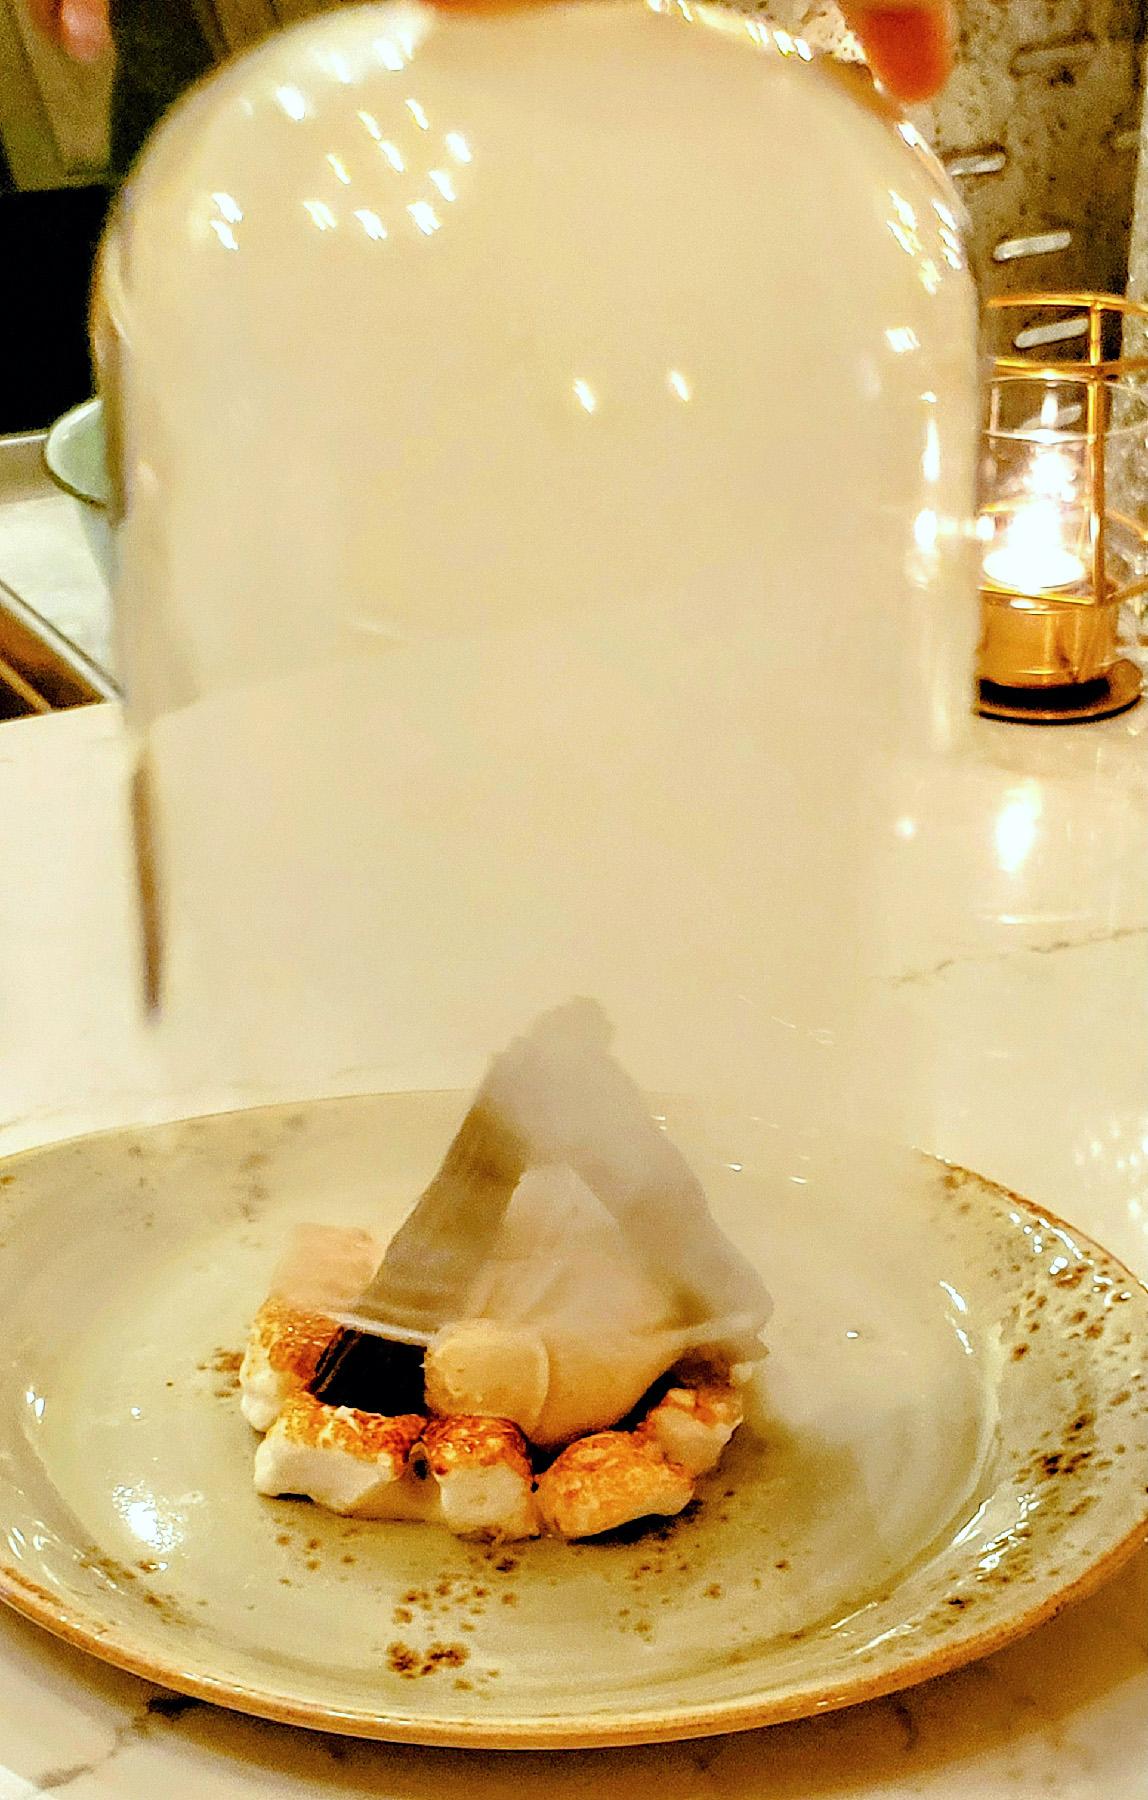 The dessert s’mores at Crafted in Yakima, Washington, are served under a smoky bell jar. (Photo courtesy of Jim Farber)